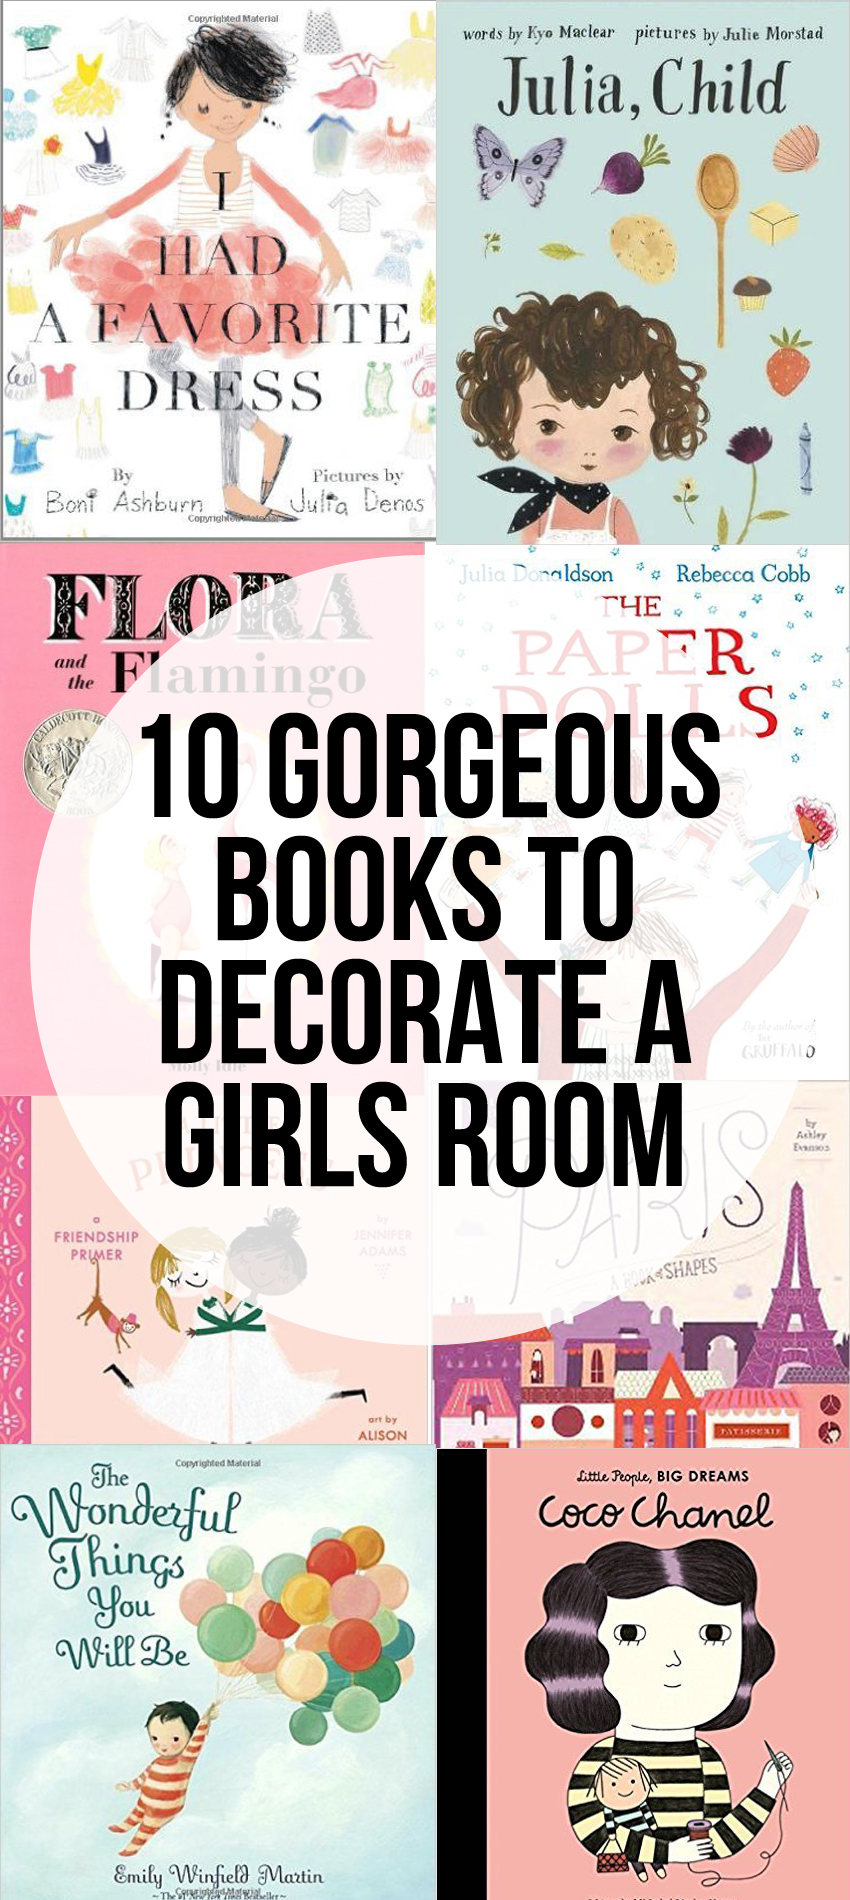 10 Gorgeous Books To Go With A Chic Nursery - great for decorating a little girls room (plus they're just great books!).